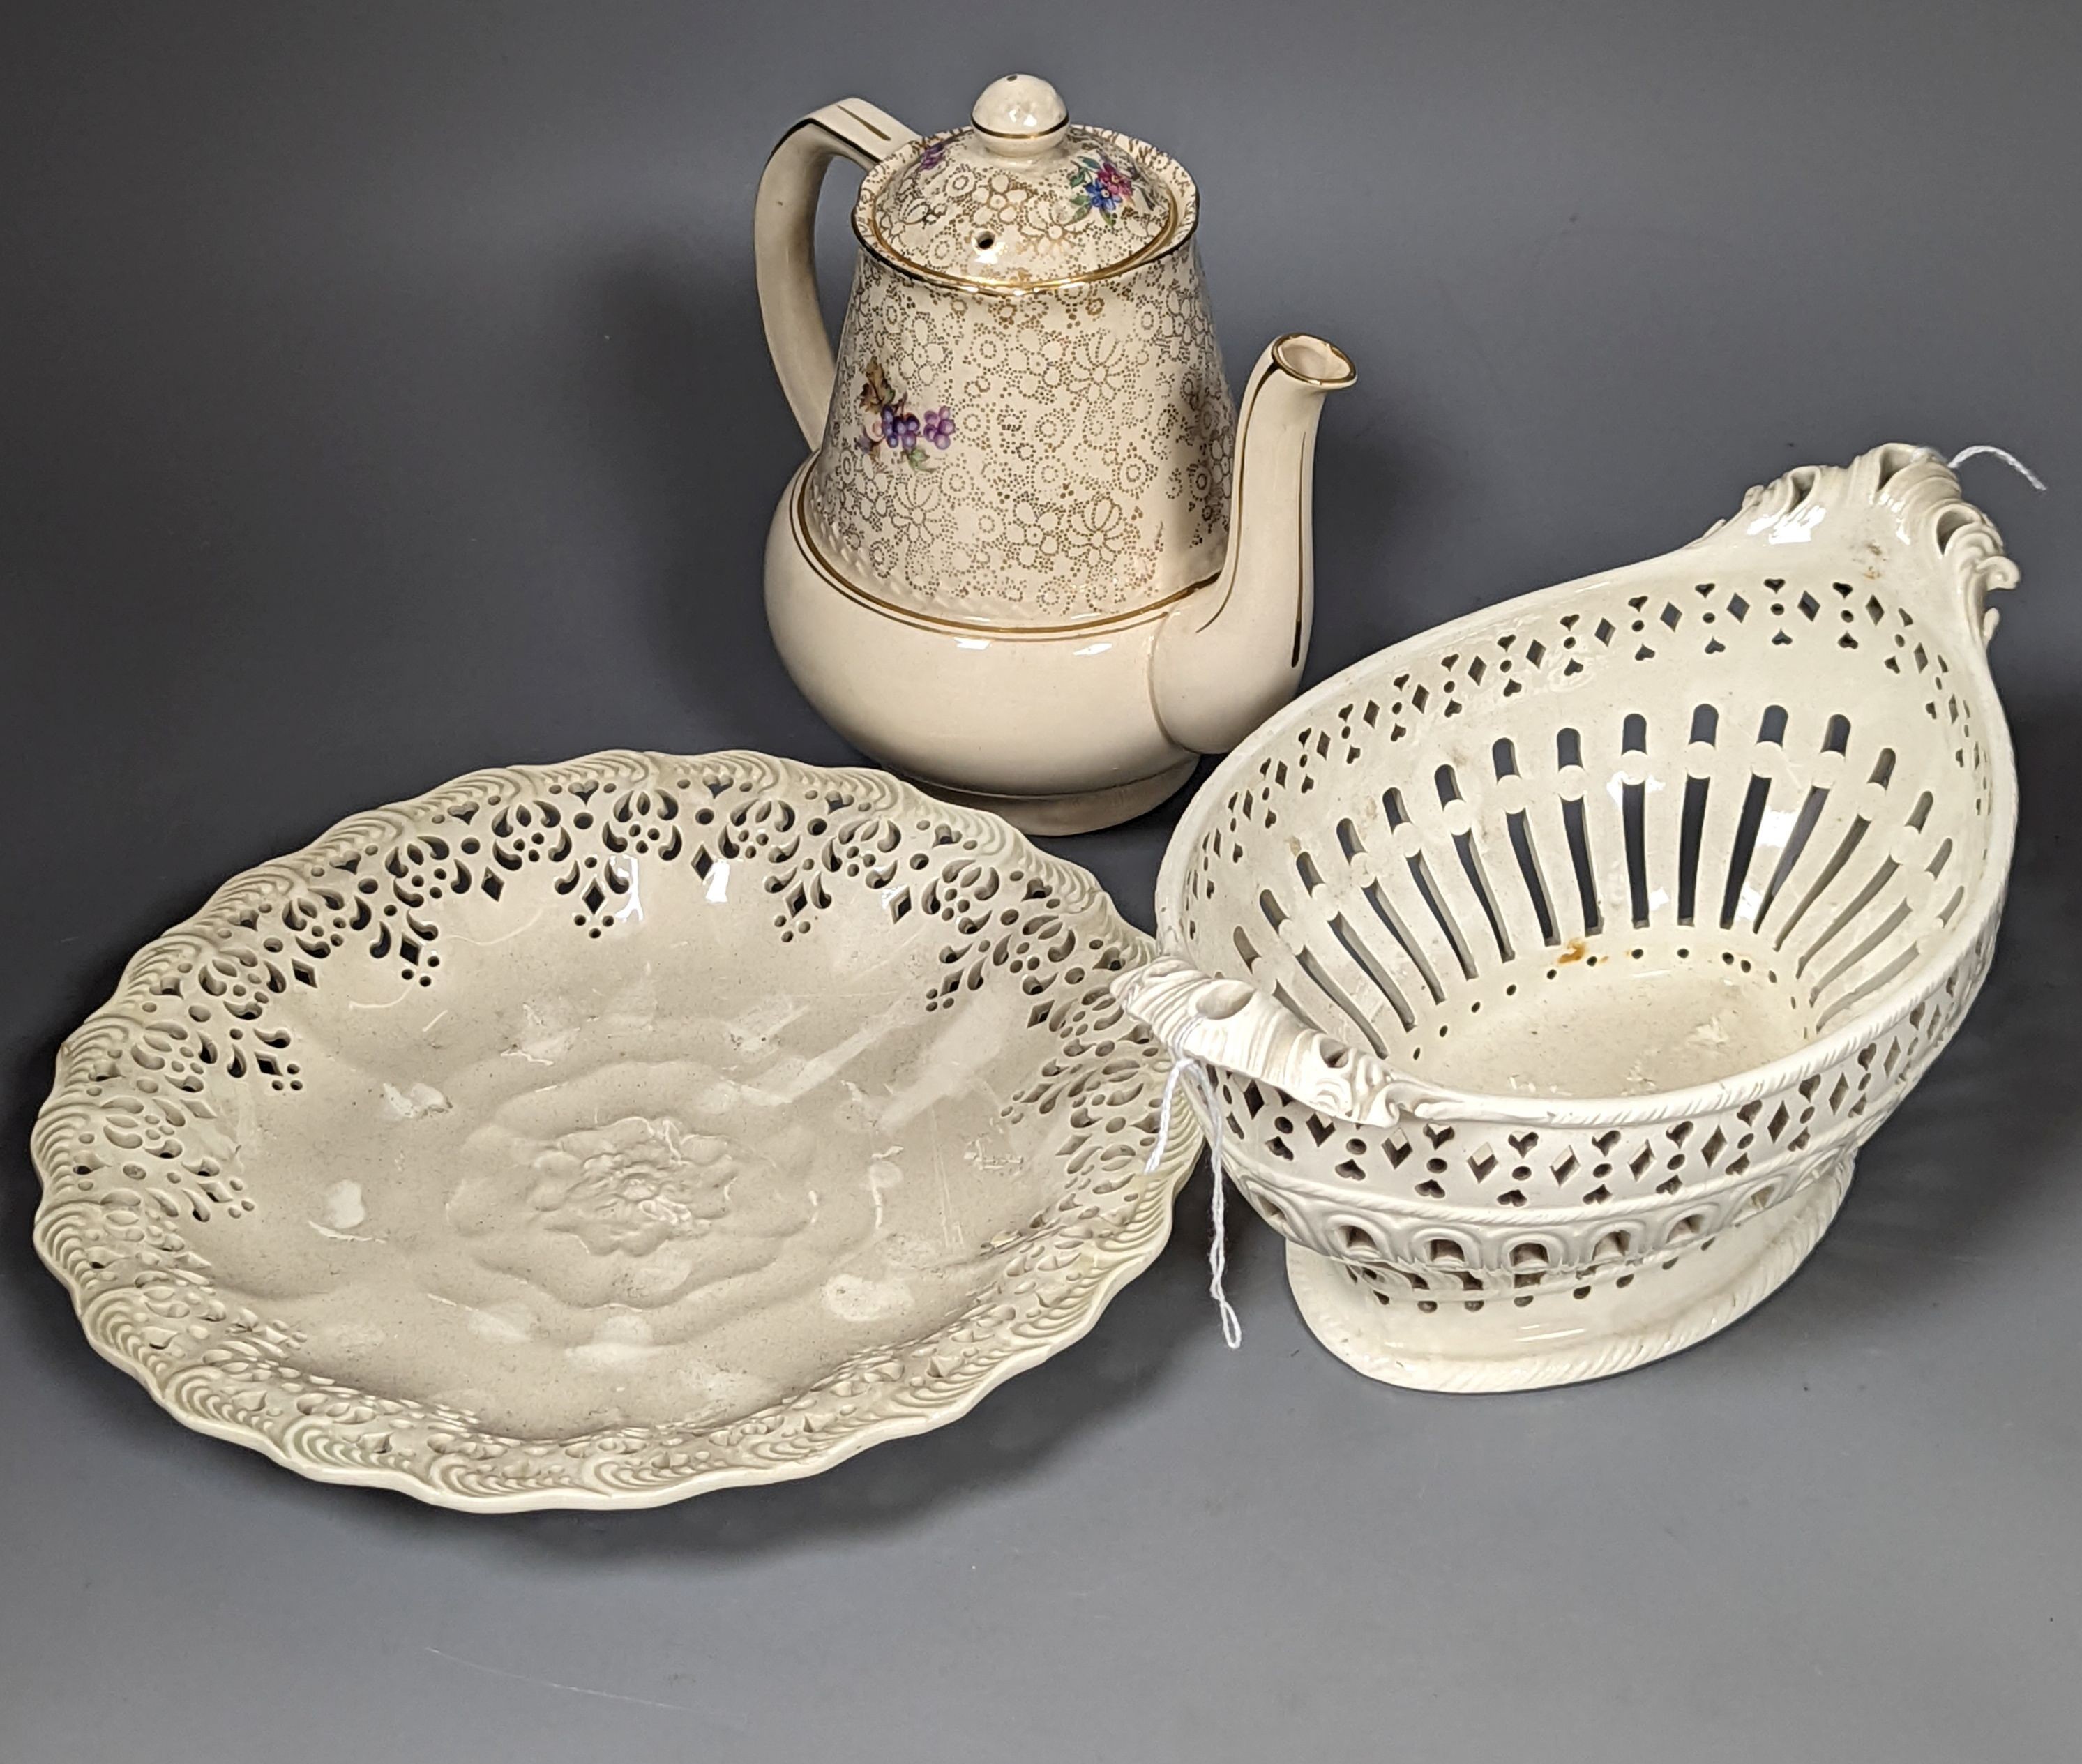 An English 18th century creamware chestnut dish and stand and a serpentine dish, A gilt decorated jug and basin and a teapot, jug and basin set, 30cms high